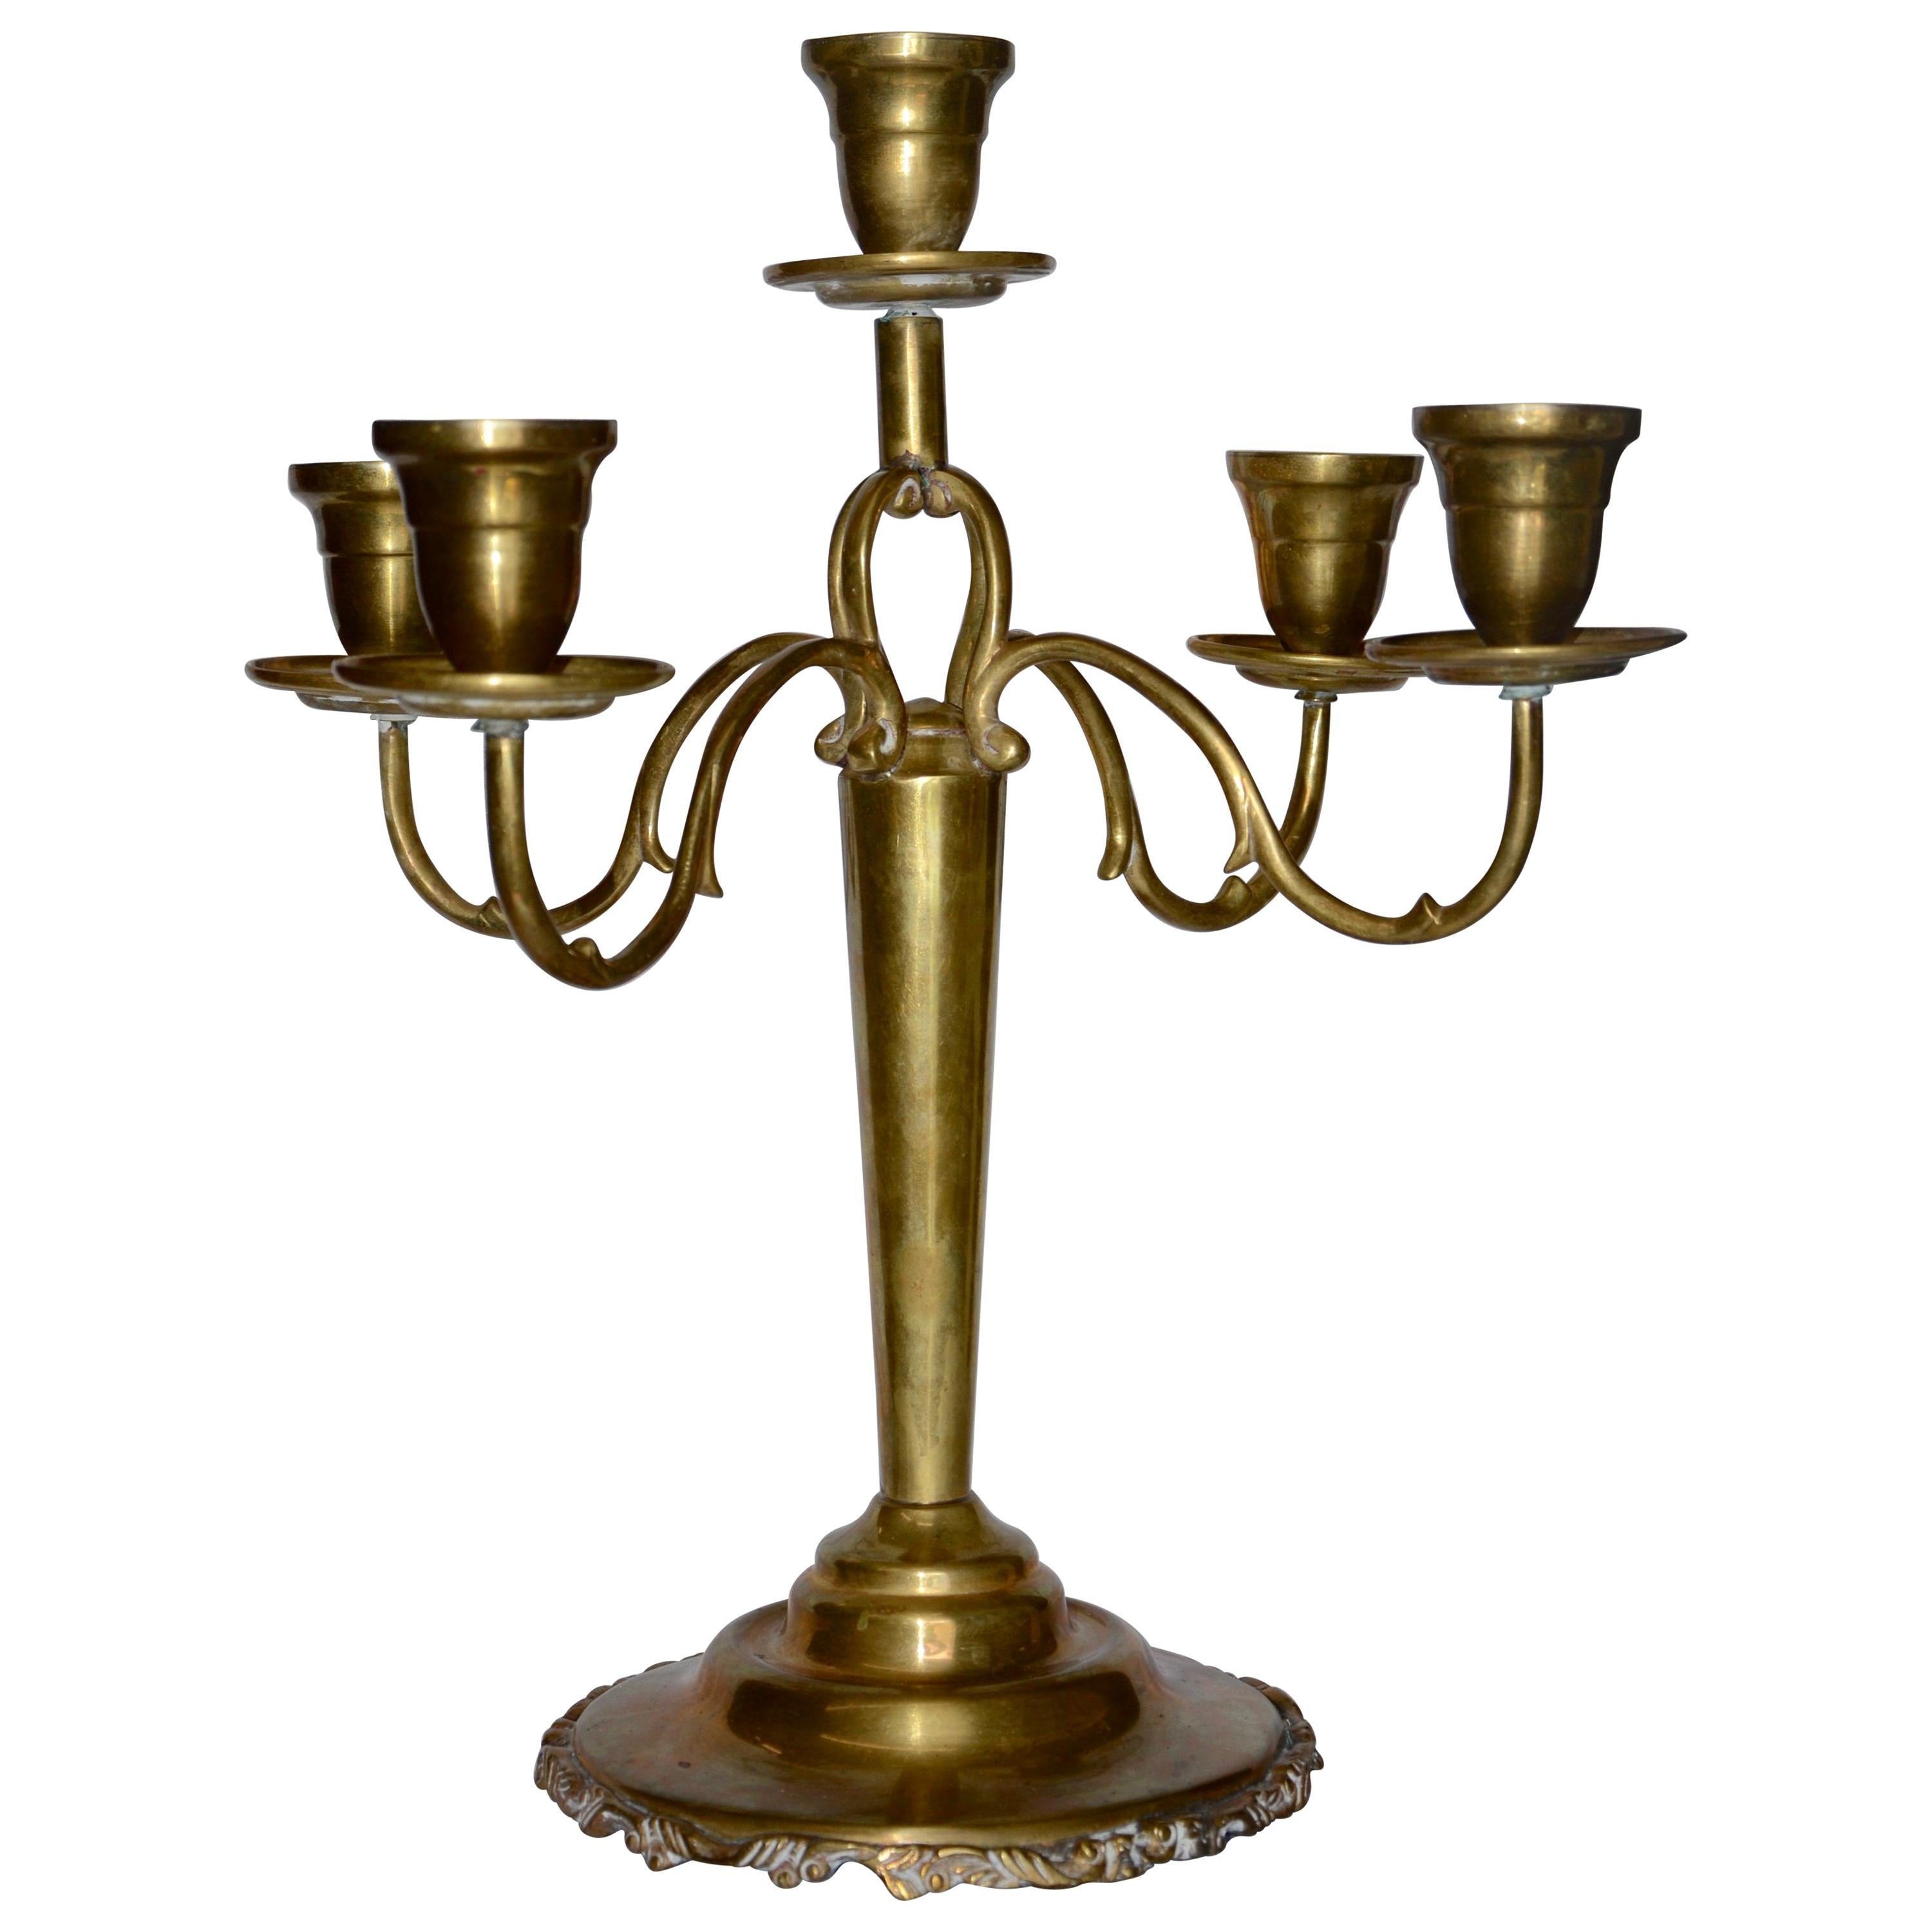 Brass Candelabra with Four Arms Vintage